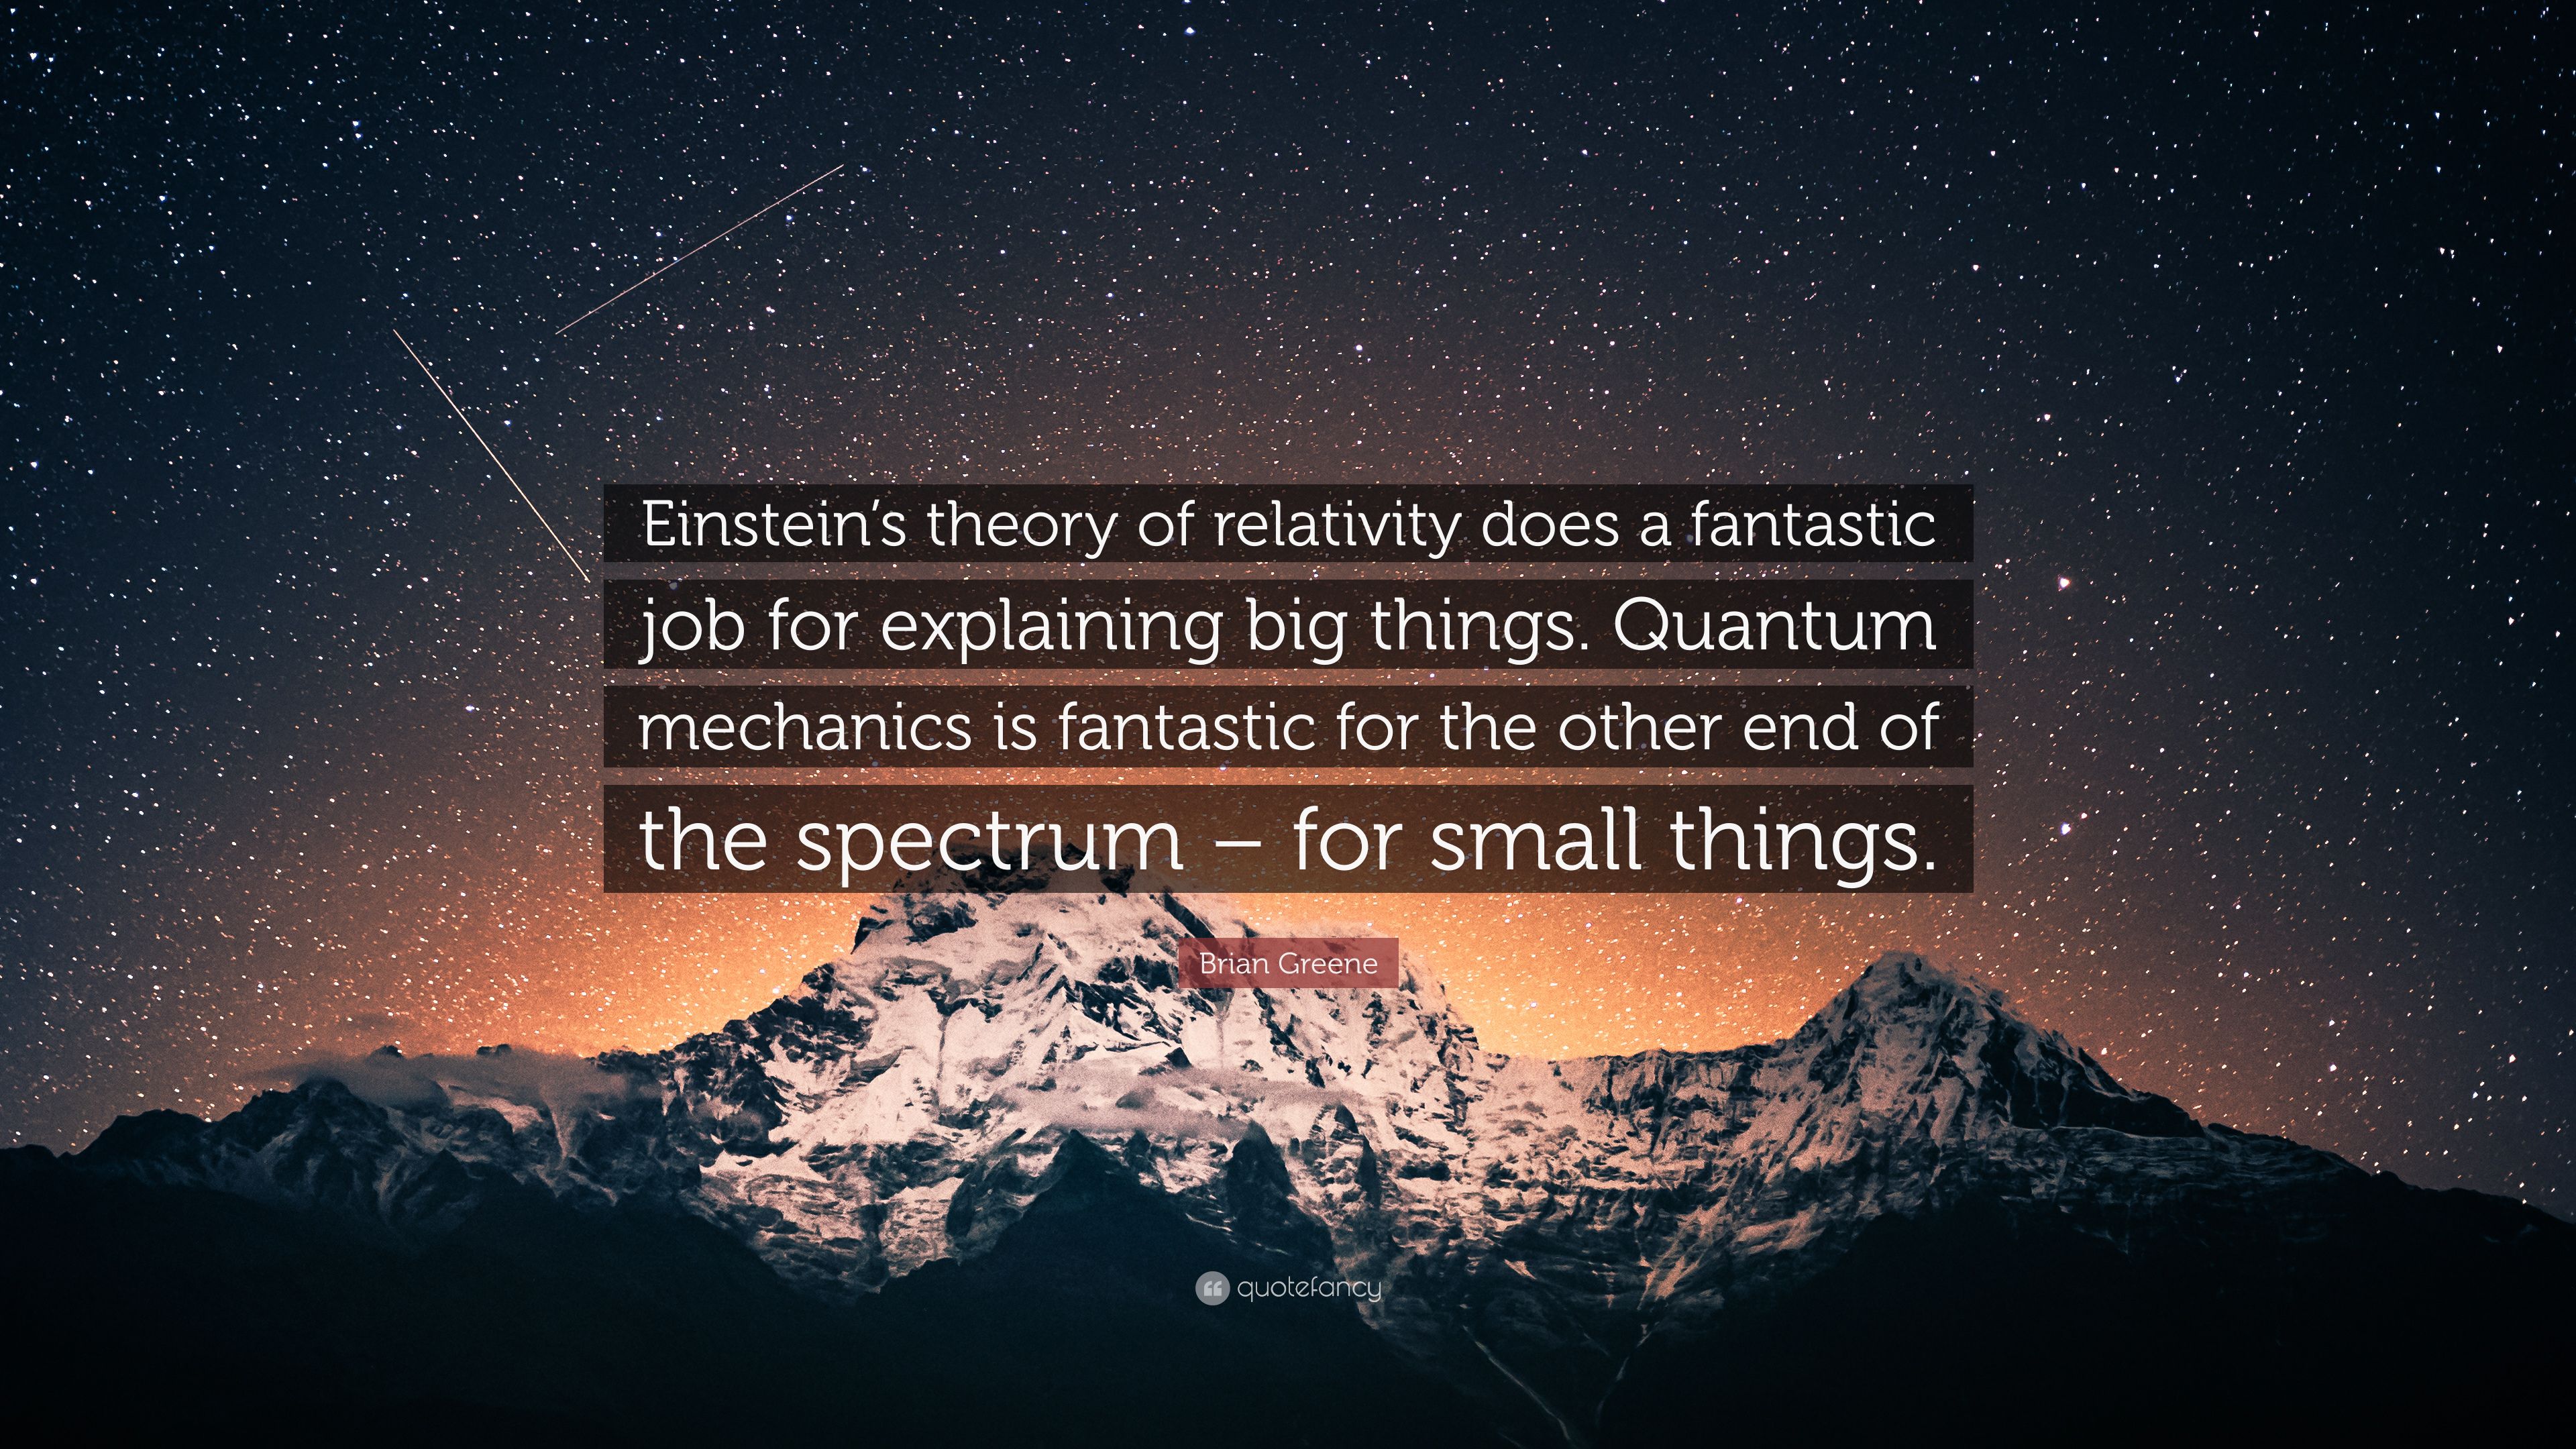 Brian Greene Quote: “Einstein's theory of relativity does a fantastic job for explaining big things. Quantum mechanics is fantastic for the o.”